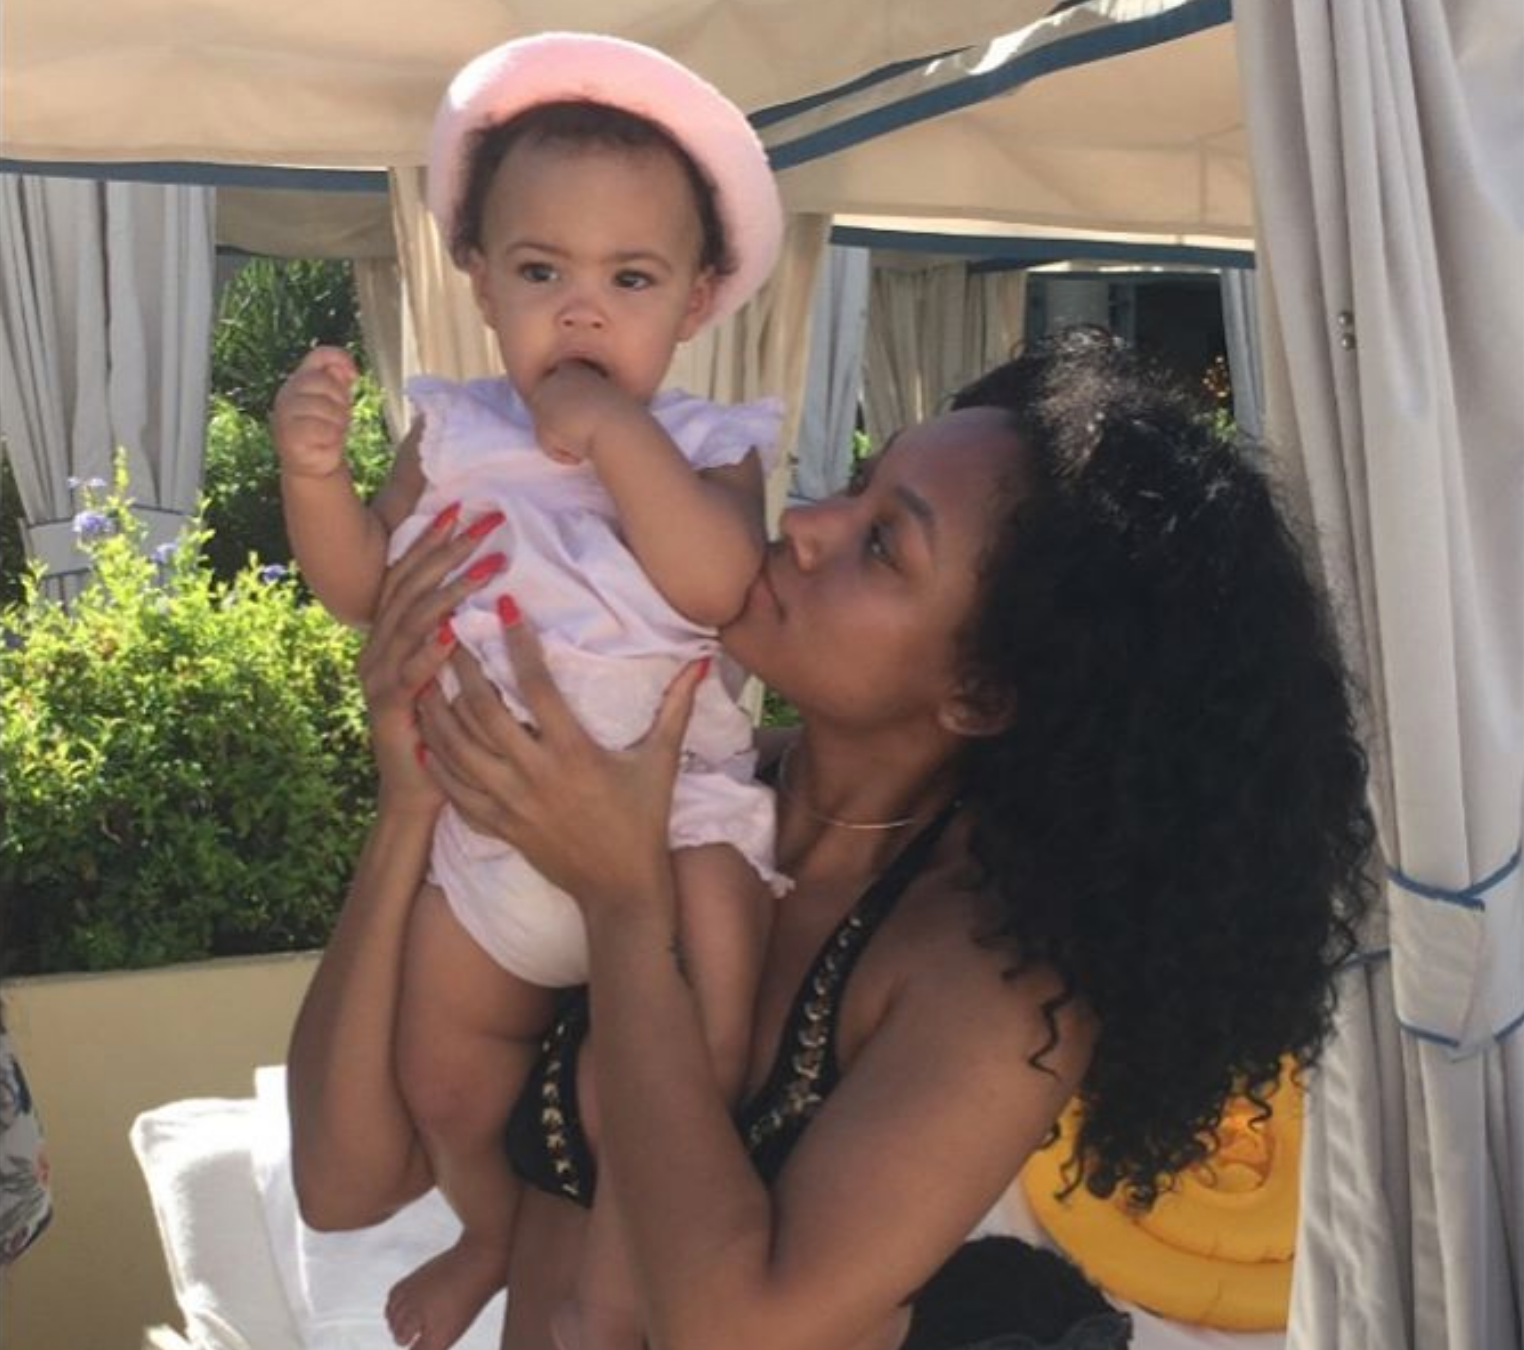 Eddie Murphy’s Daughters Bria And Izzy Spend Quality Time Together